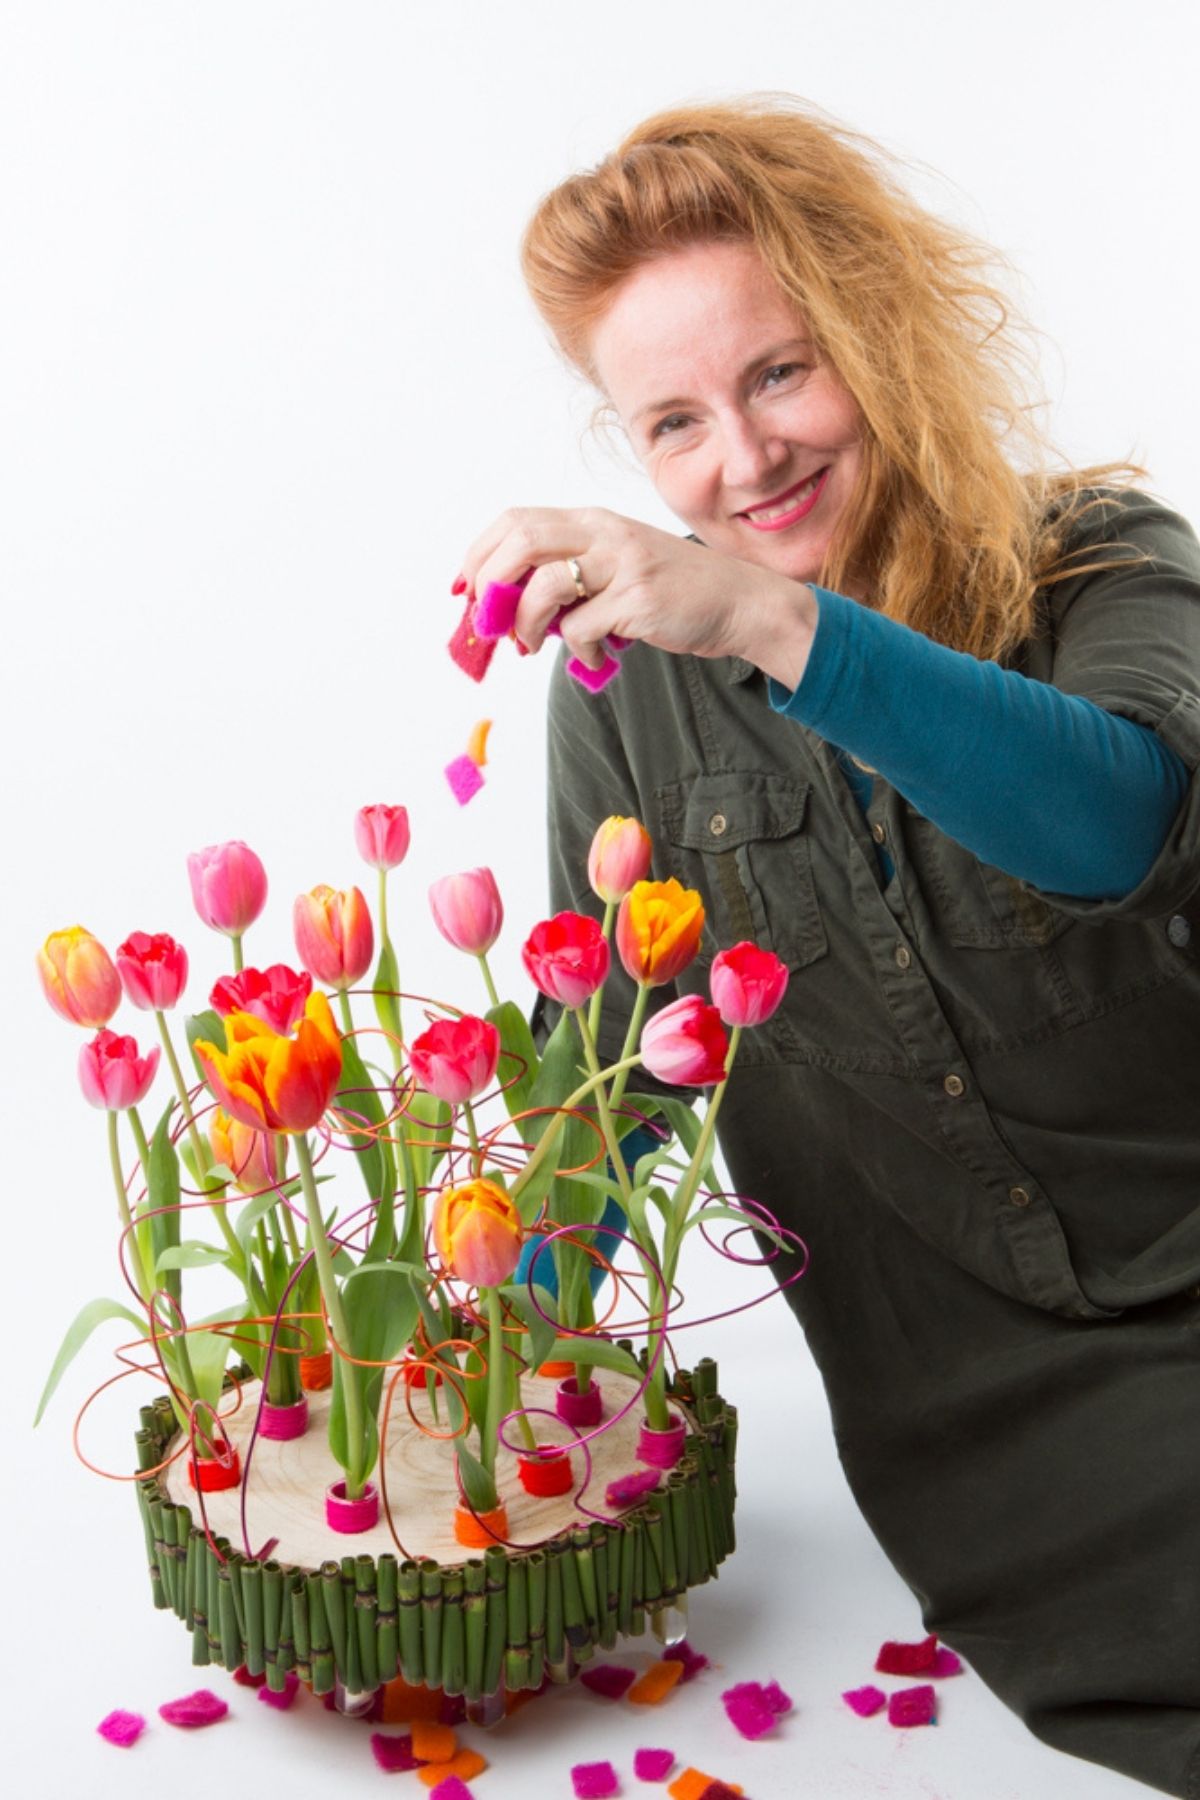 Symphony of Tulips - tulip floral design by Lily Beelen - on Thursd.